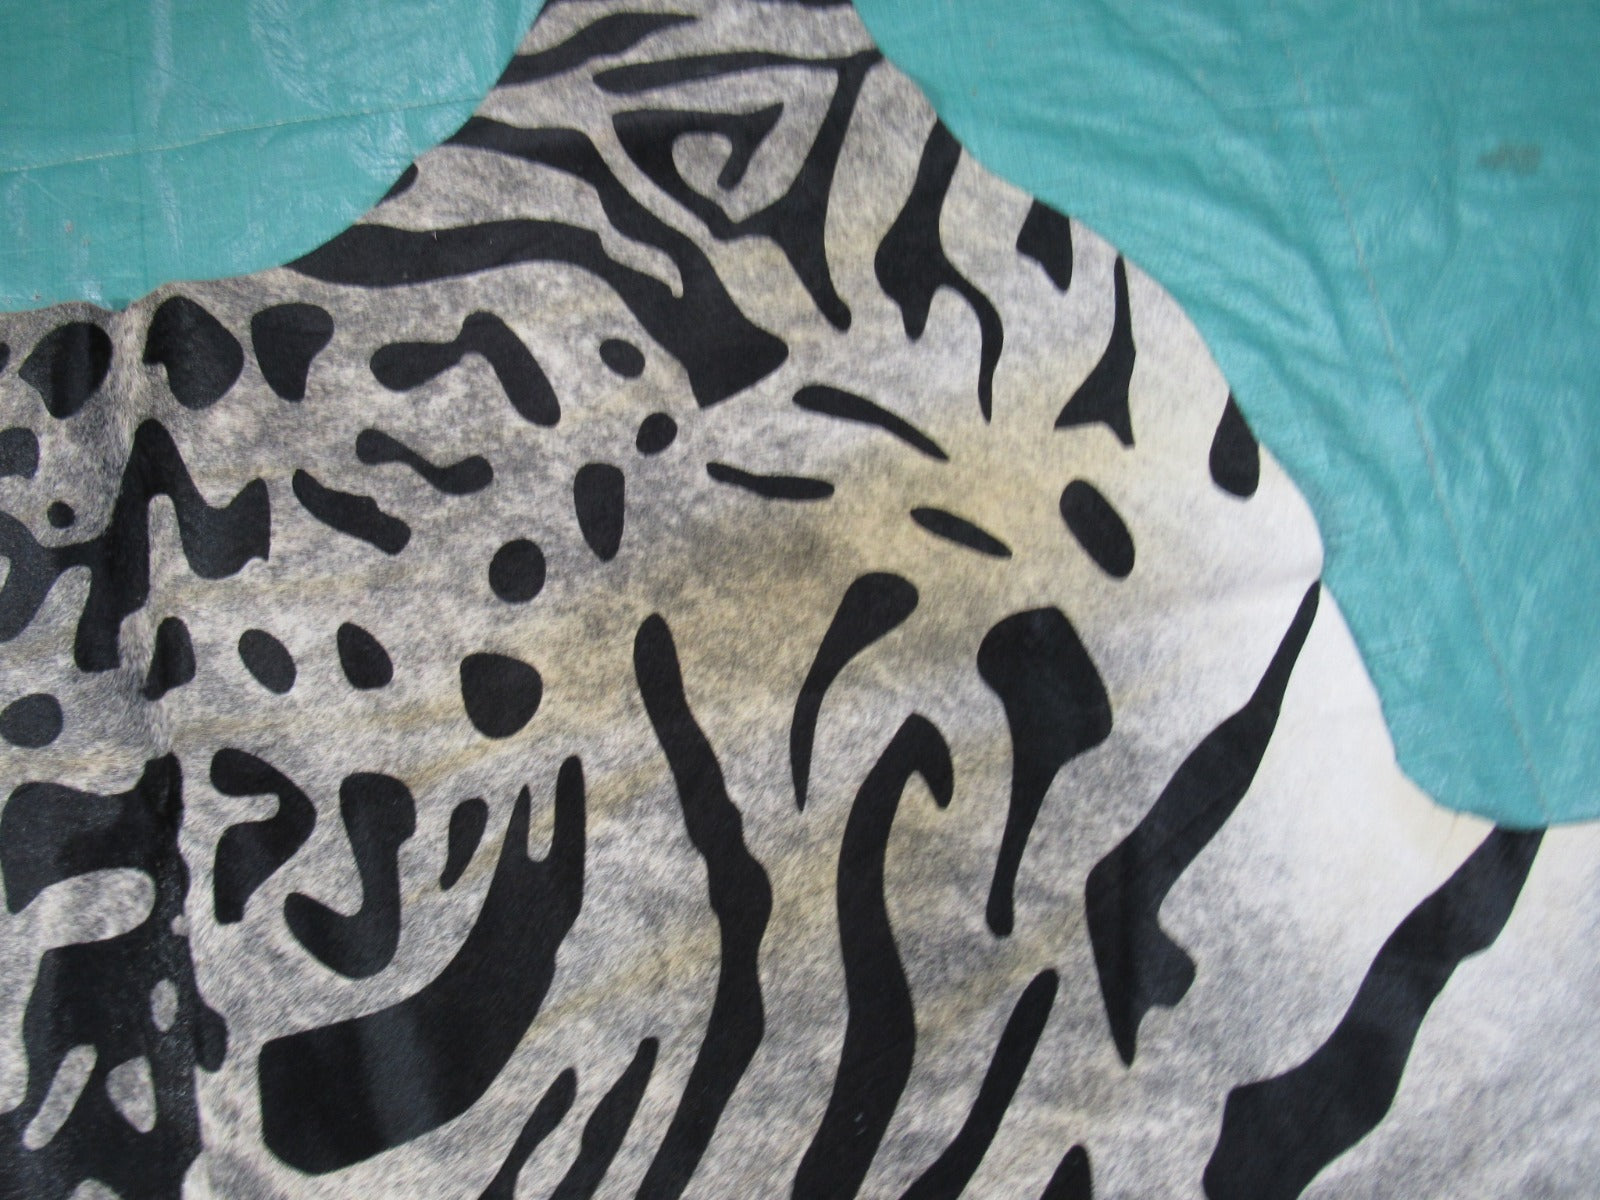 Grey Brindle Siberian Tiger Cowhide Rug (some yellow in the neck) Size: 7.5x6.5 feet O-1131